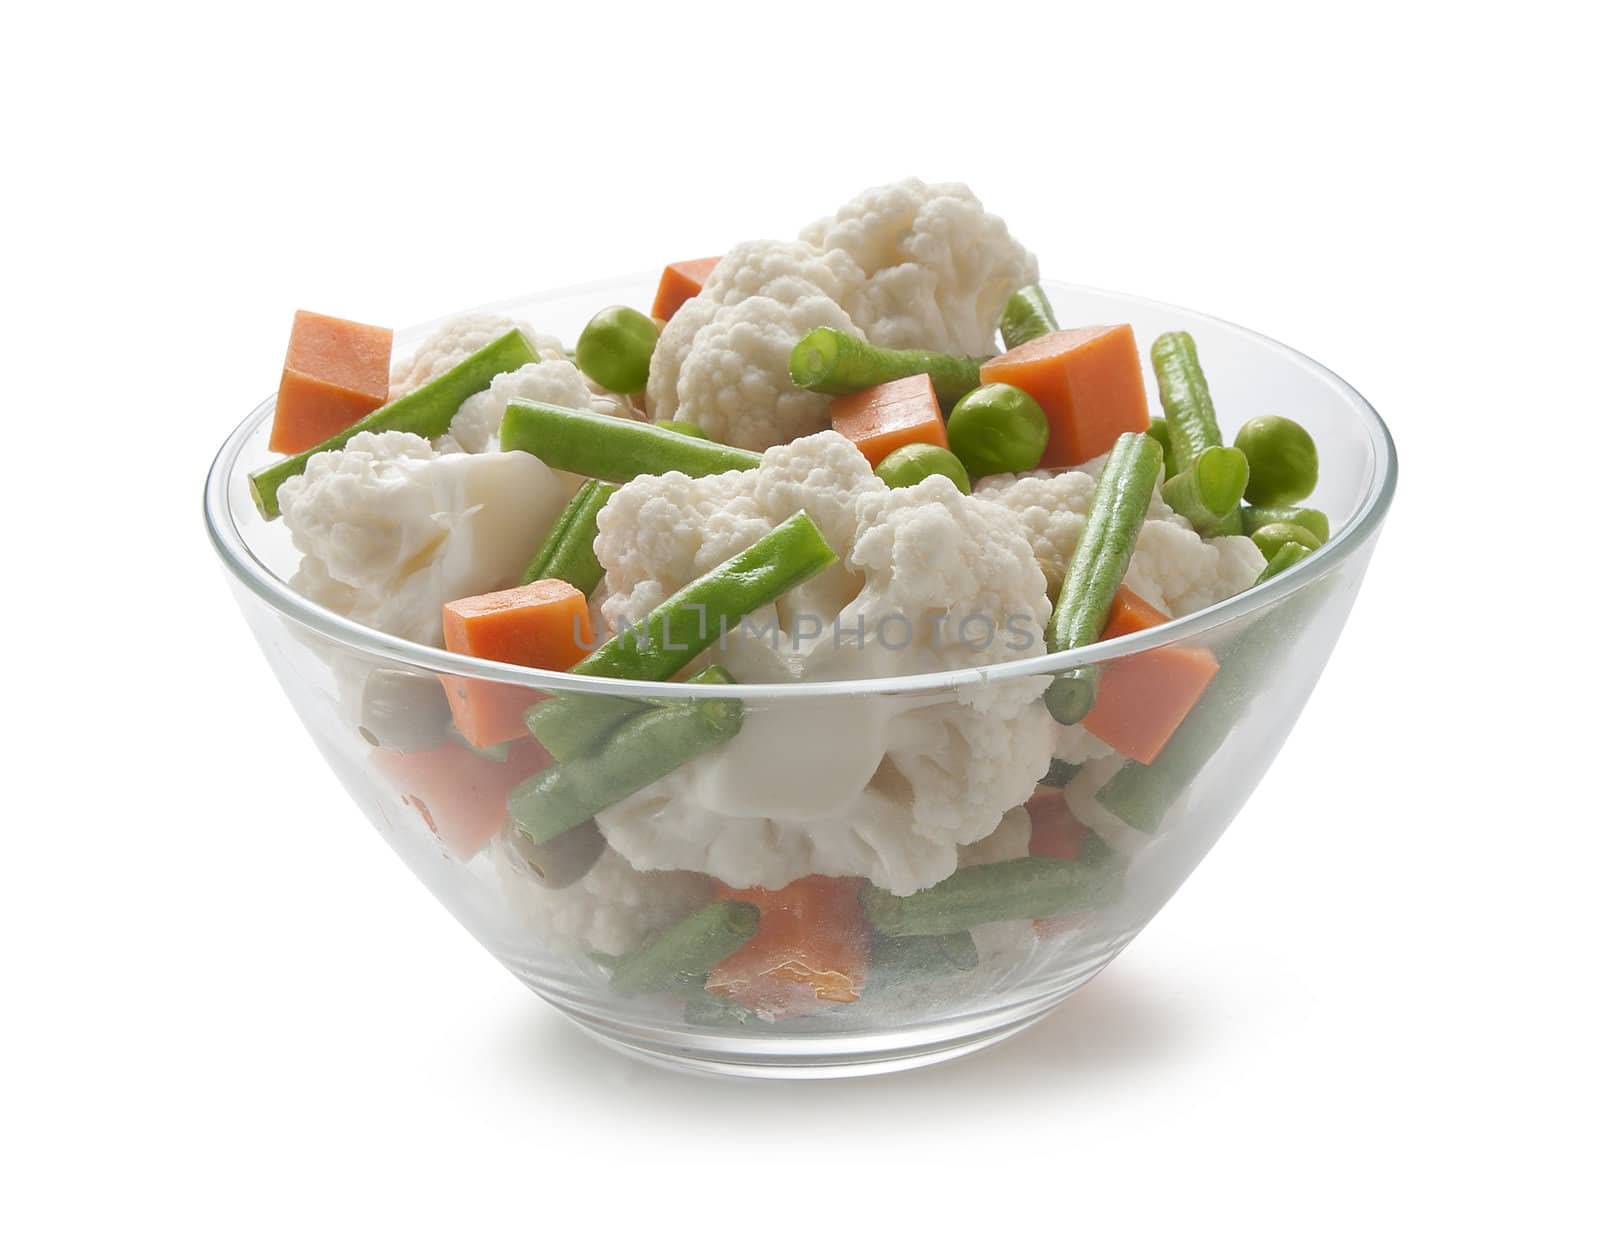 Vegetable mix with cauliflower, peas, carrot and kidney bean in the glass bowl